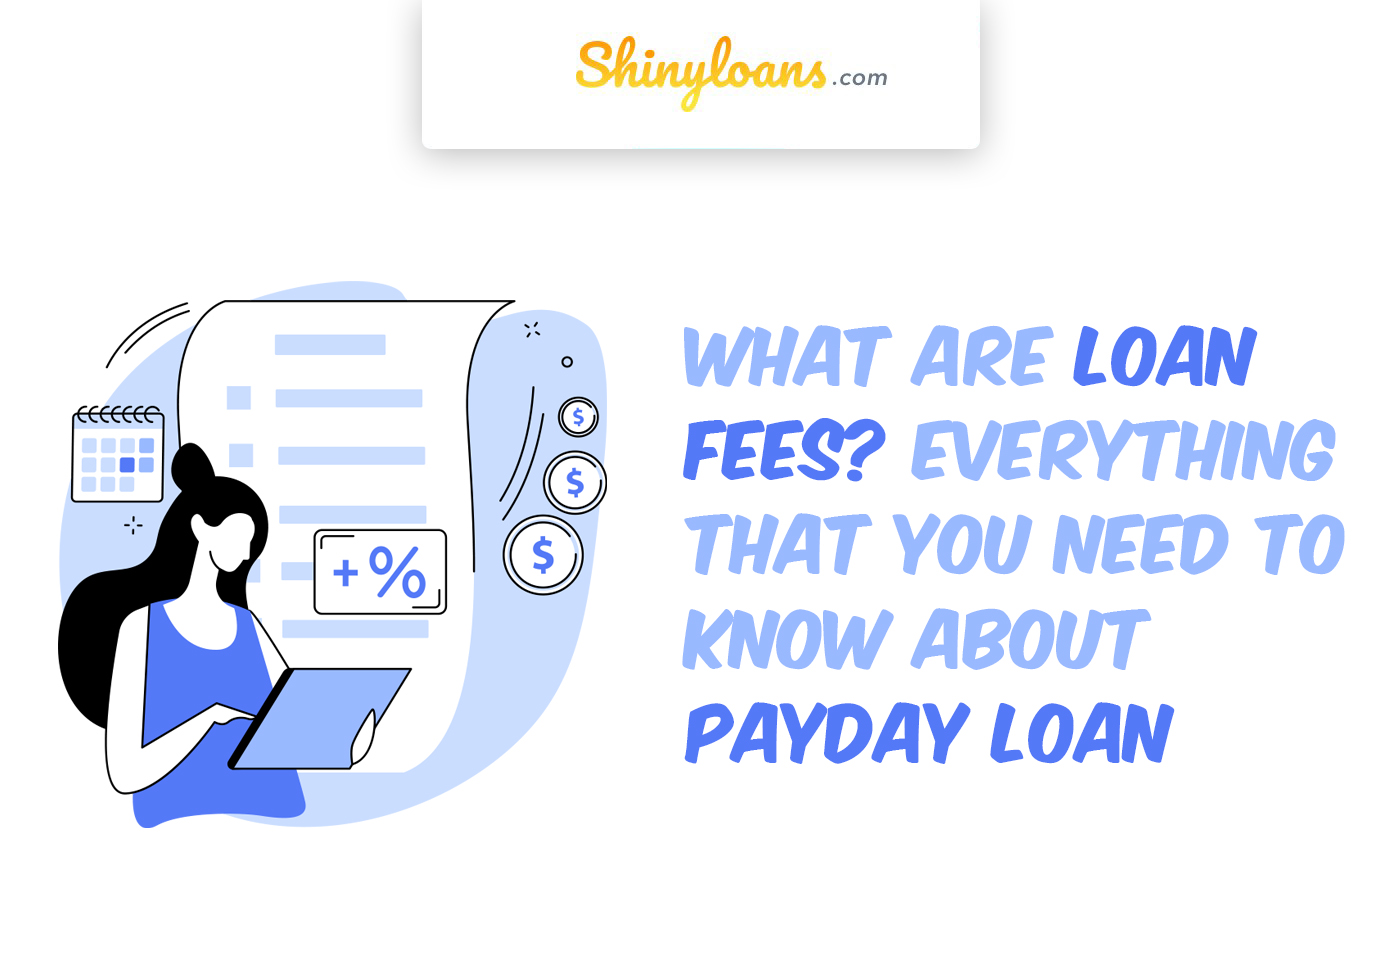 What Are Loan Fees? Everything That You Need To Know About Payday Loan